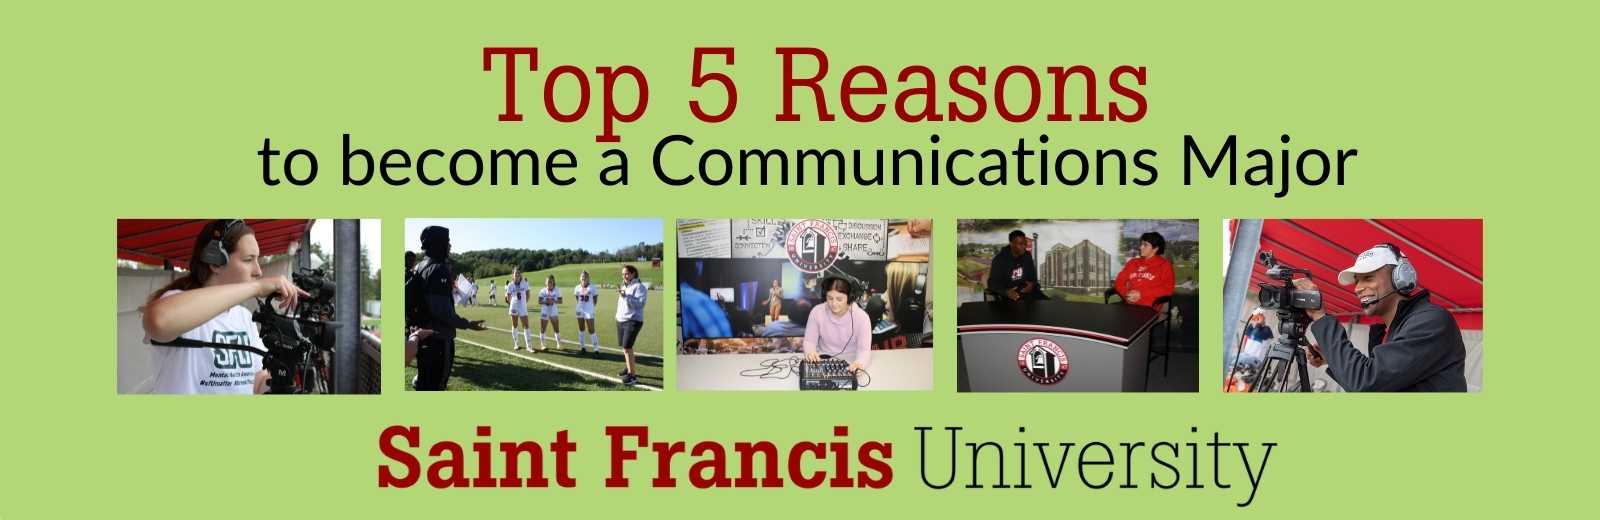 top 5 reasons to become a communications major at SFU